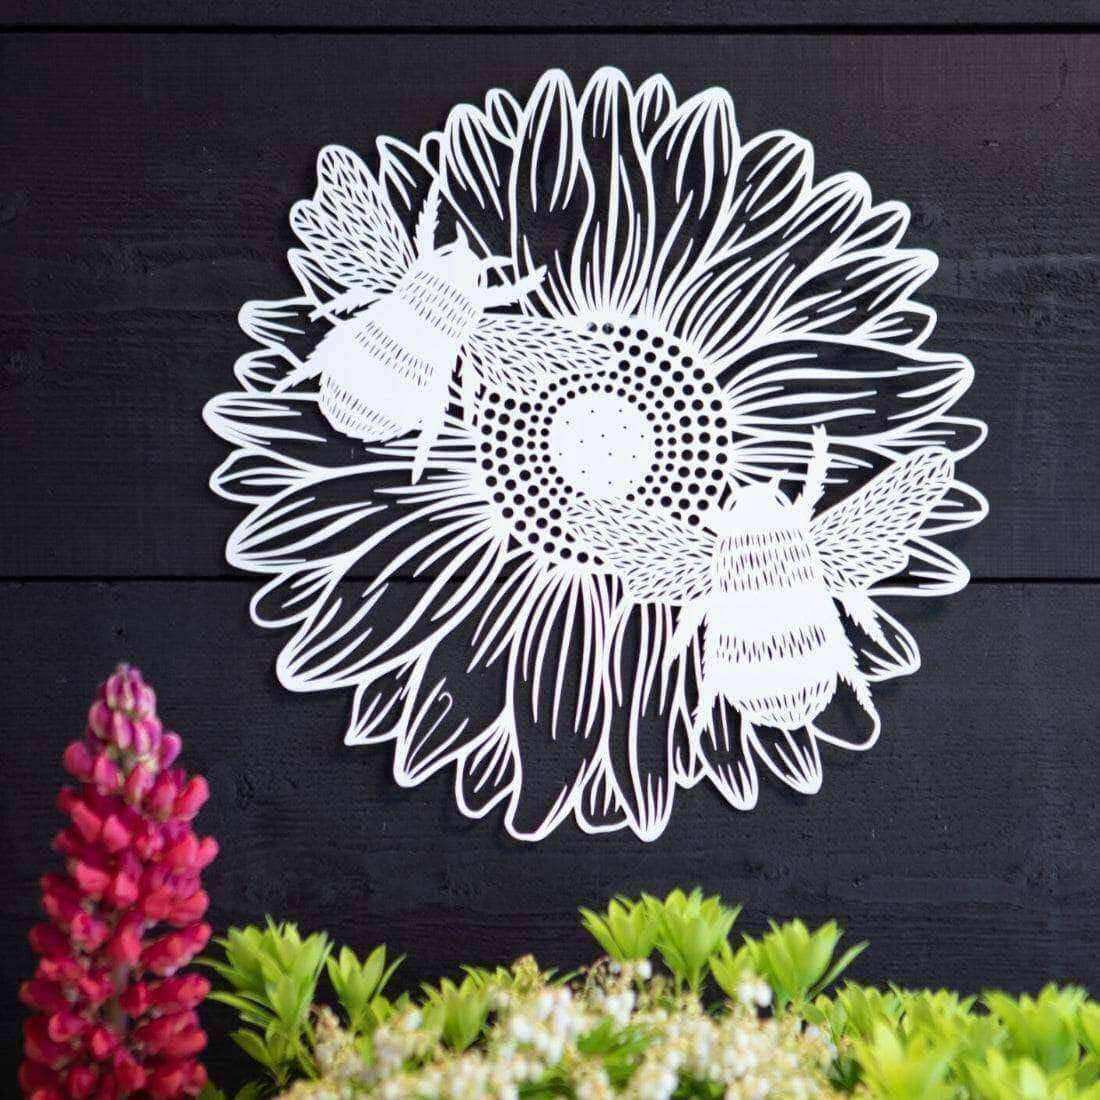 Bumble Bees on Flower Metal Garden Wall Art - The Farthing